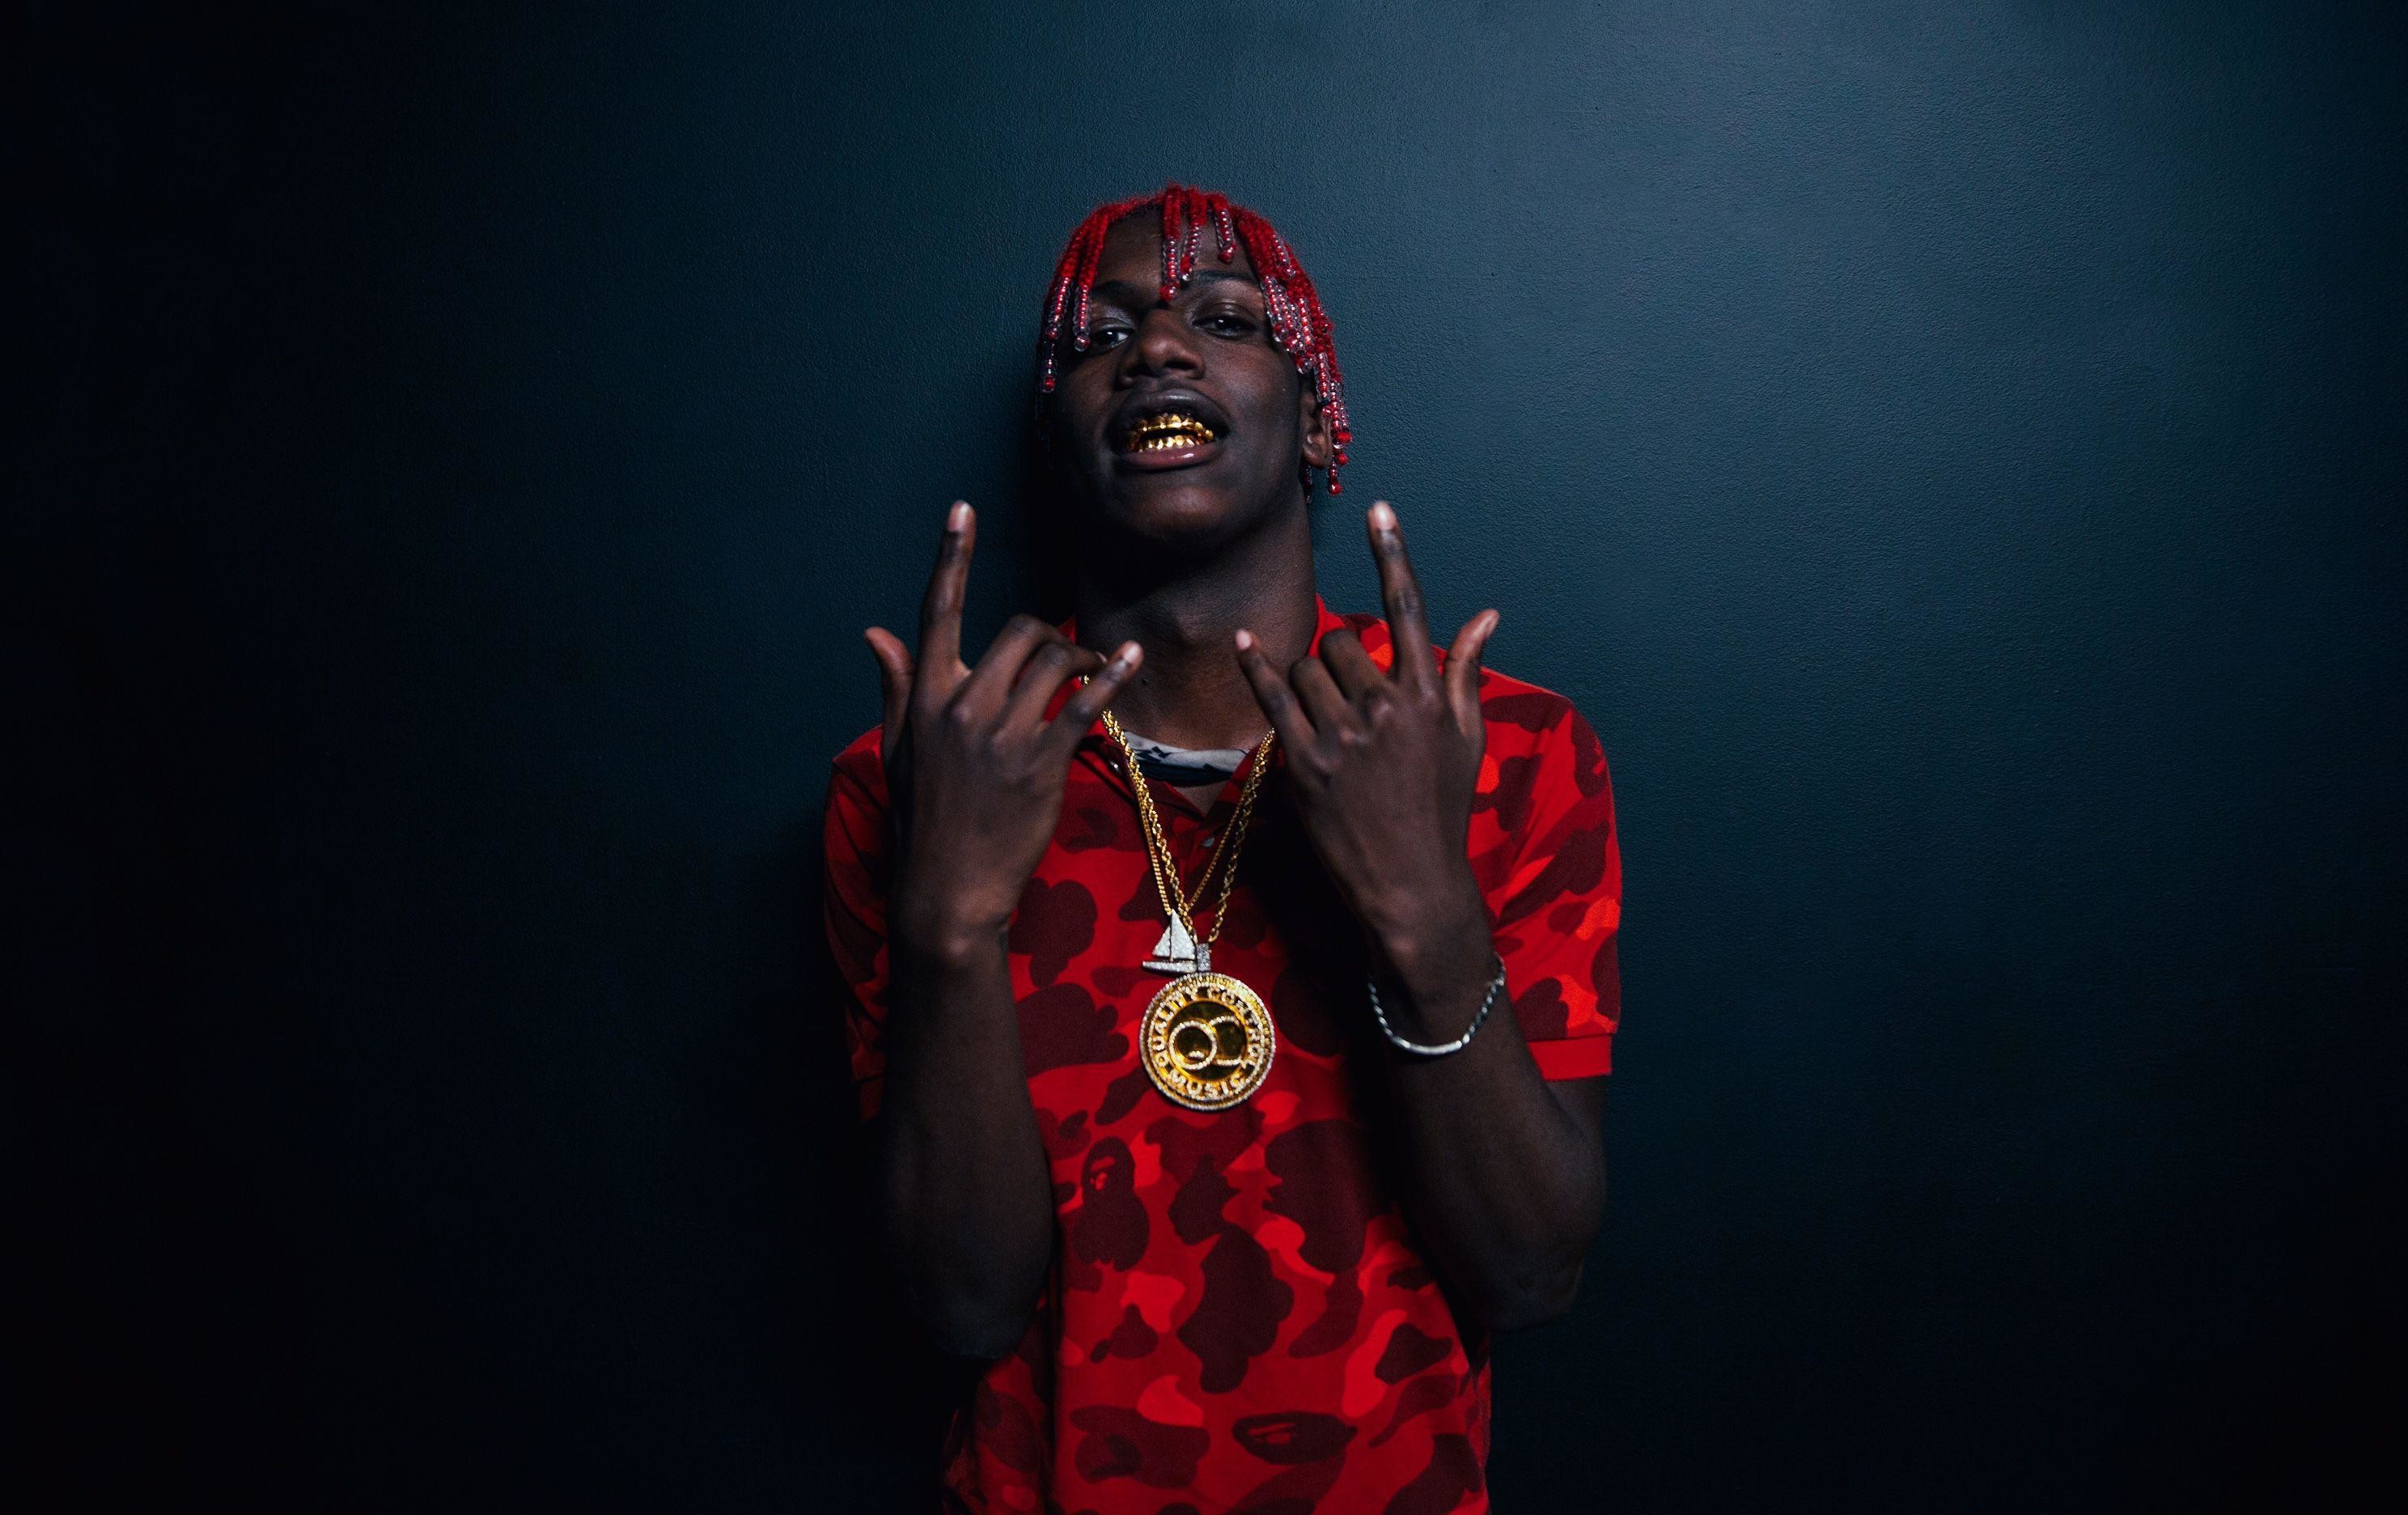 Lil yachty album download